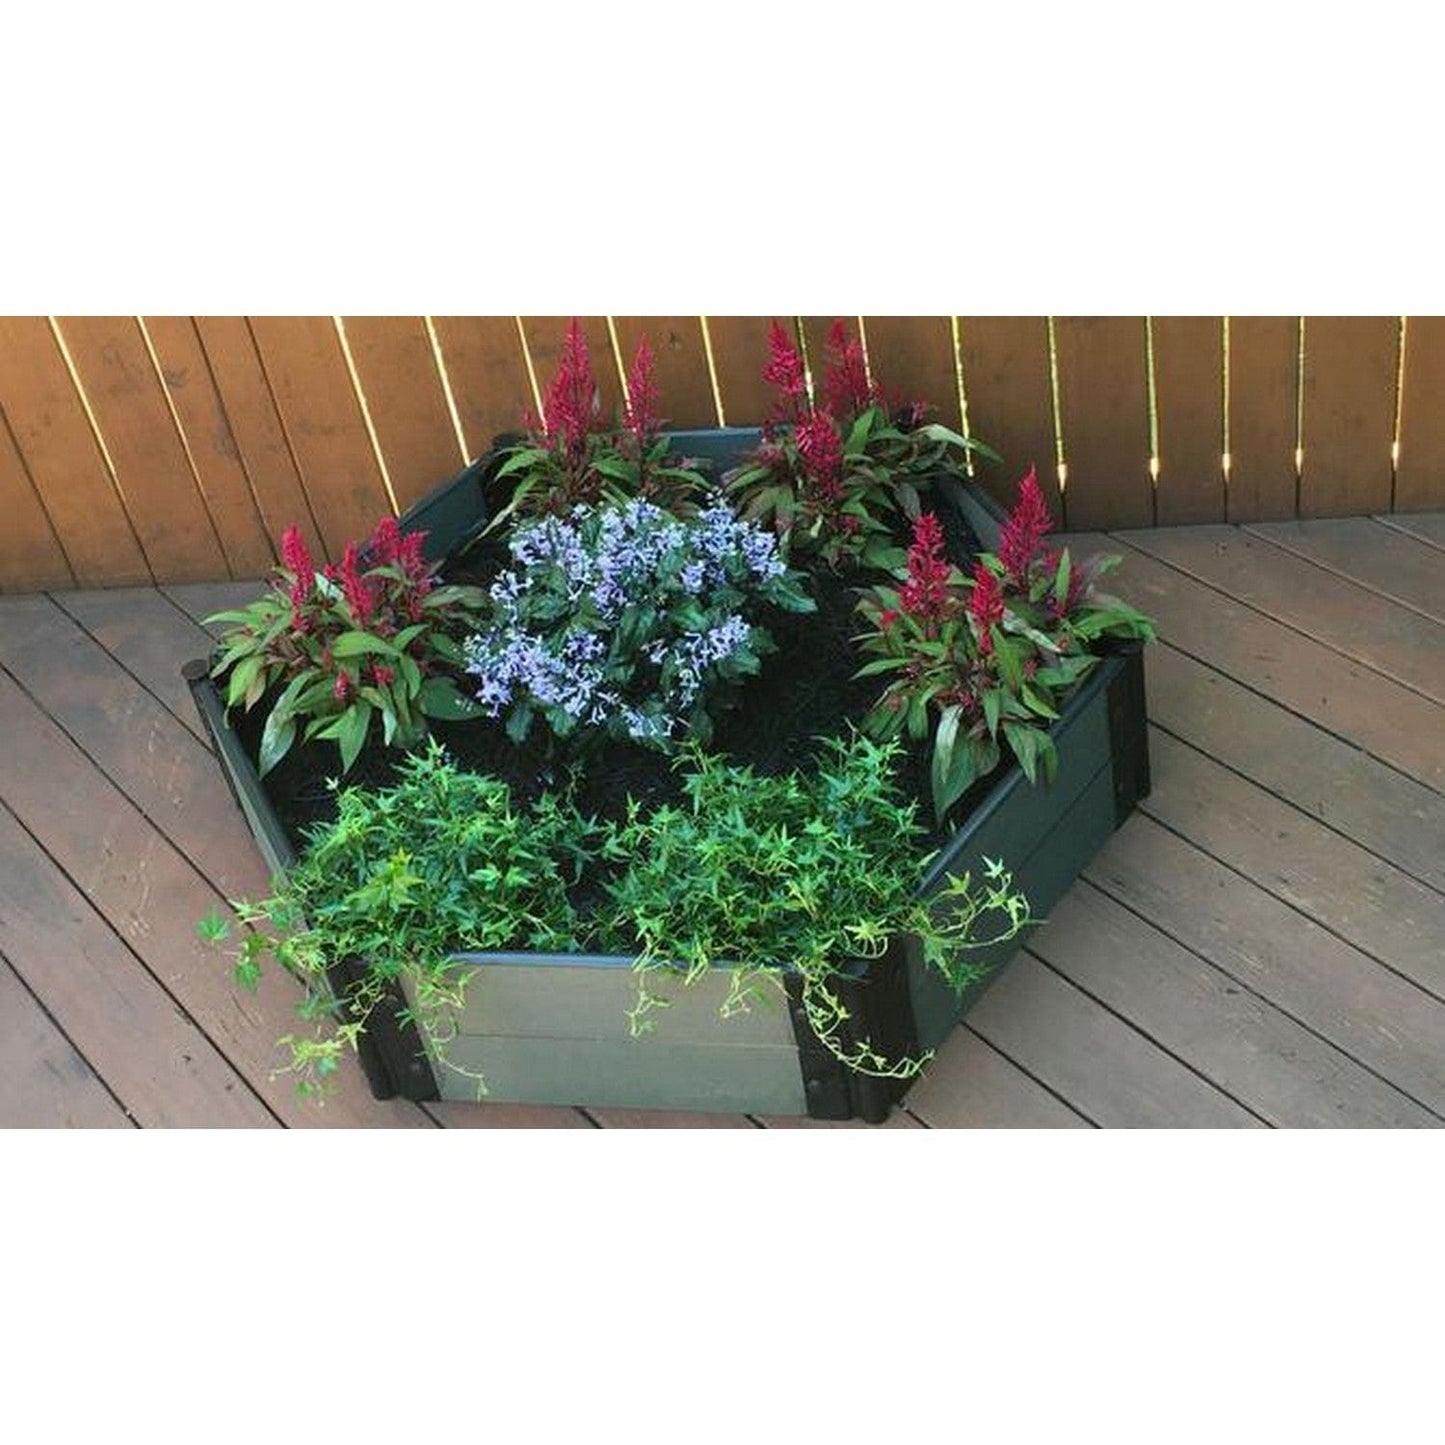 Frame It All Gardening Accessories Frame It All | Tool-Free Fort Jefferson Raised Garden Bed (Hexagon) 4' X 4' X 5.5" - Weathered Wood - 1" Profile 200001468